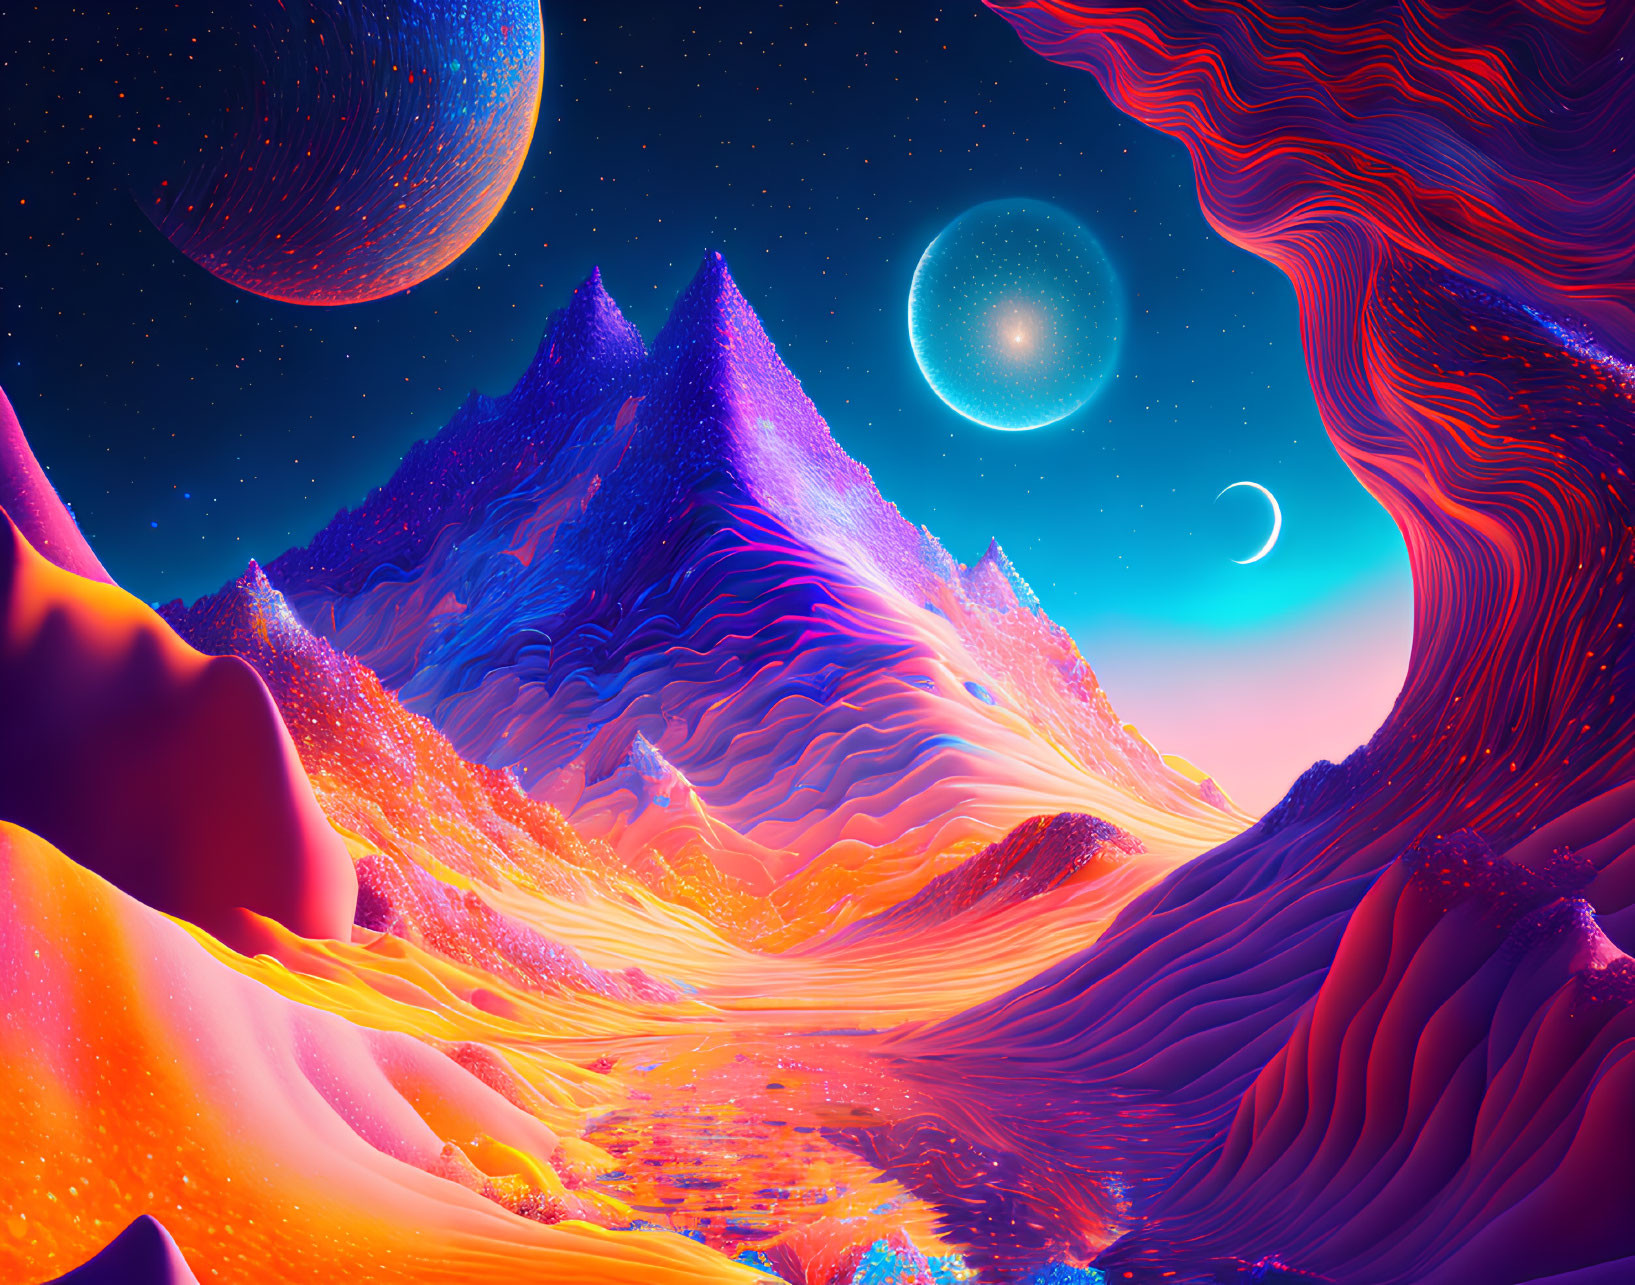 Neon-colored landscape with undulating mountains and celestial bodies